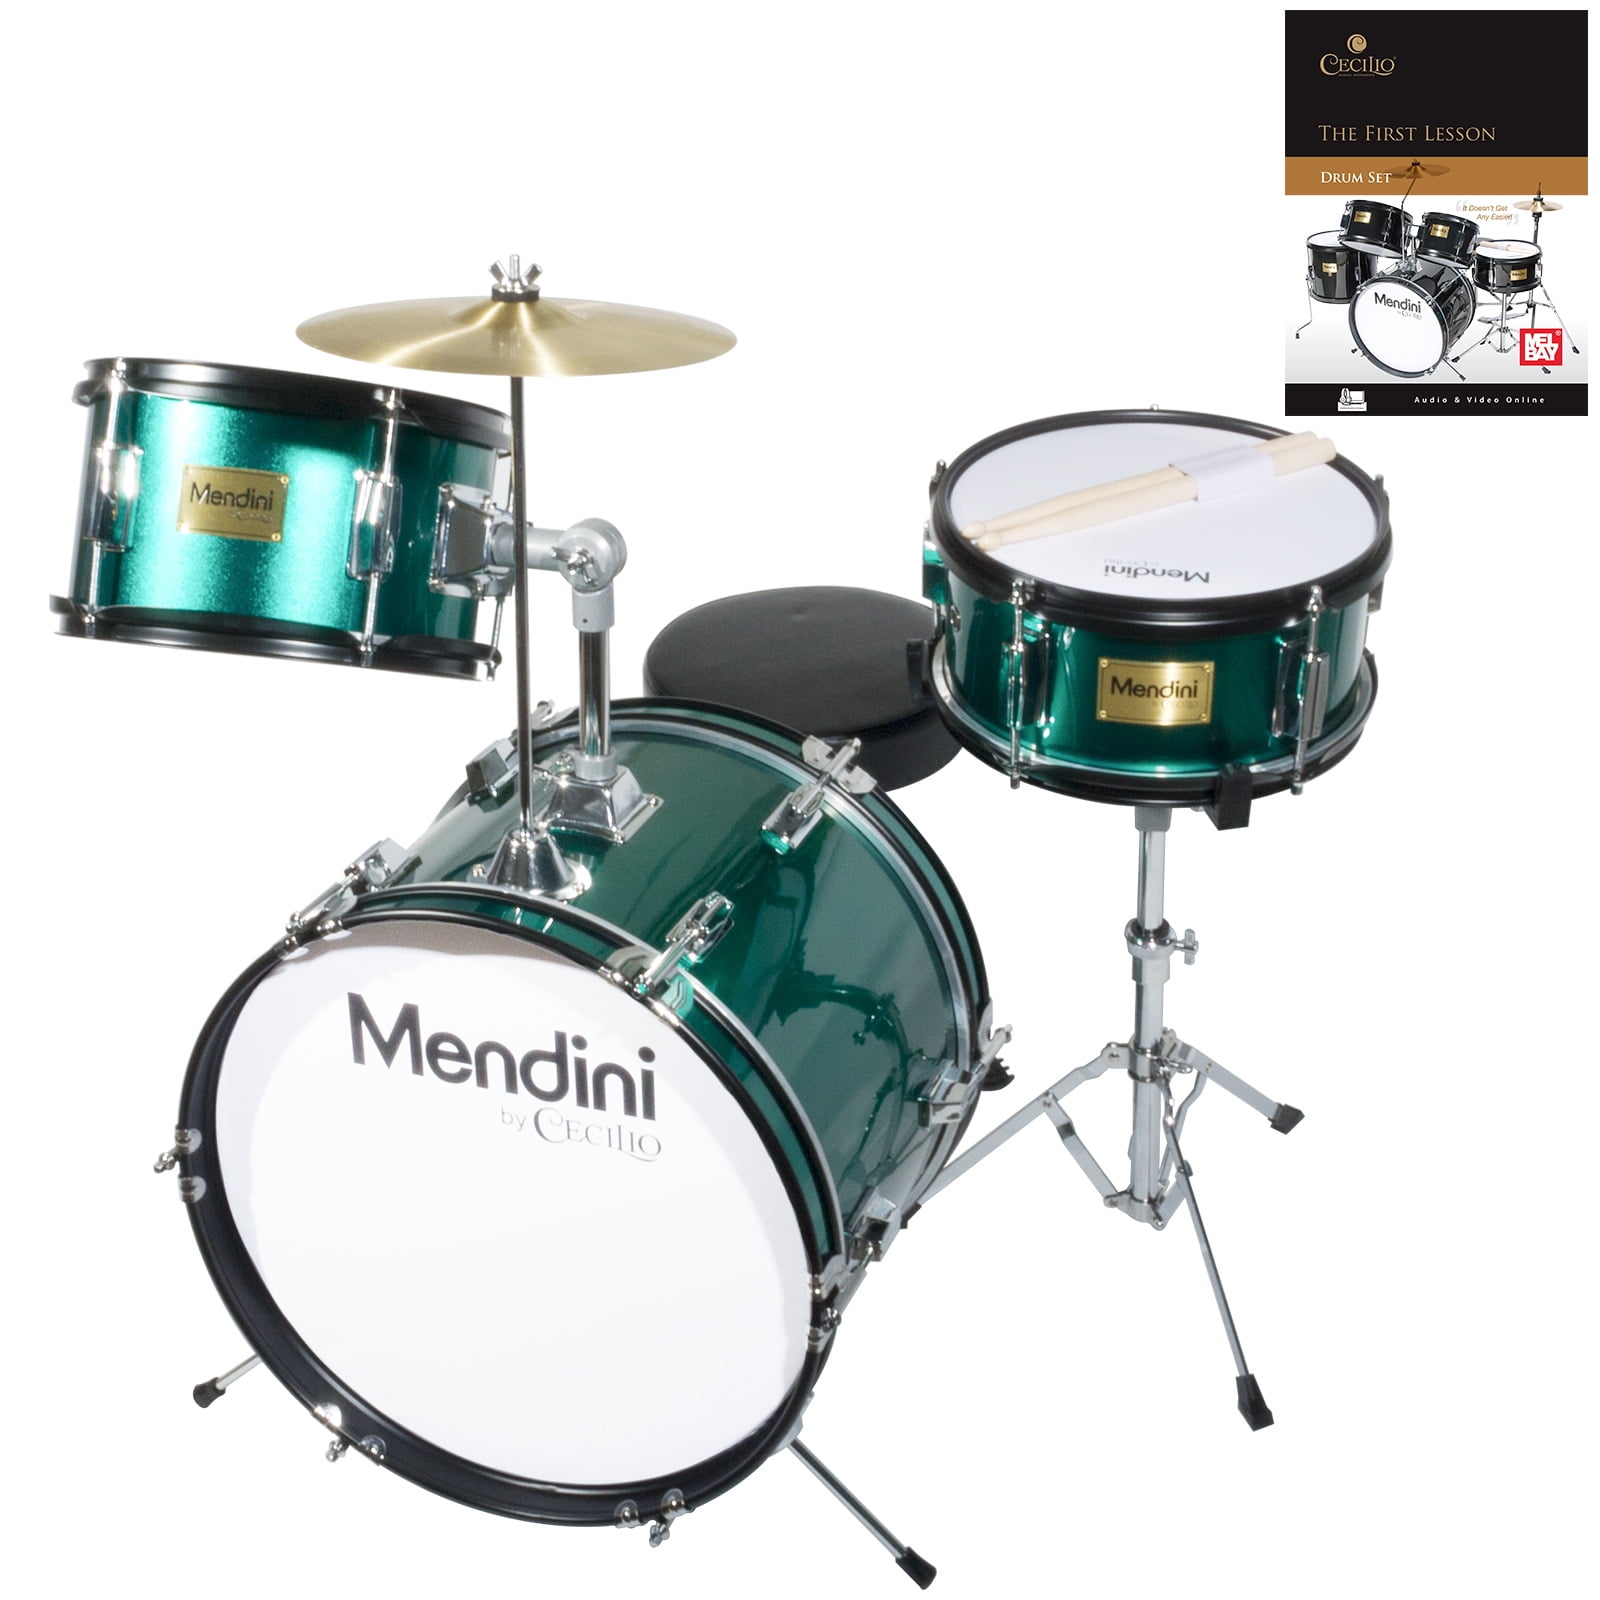 Mendini by Cecilio 16 inch 3-Piece Kids/Junior Drum Set with Adjustable Throne Cymbal Metallic Silver MJDS-3-SR Pedal & Drumsticks 